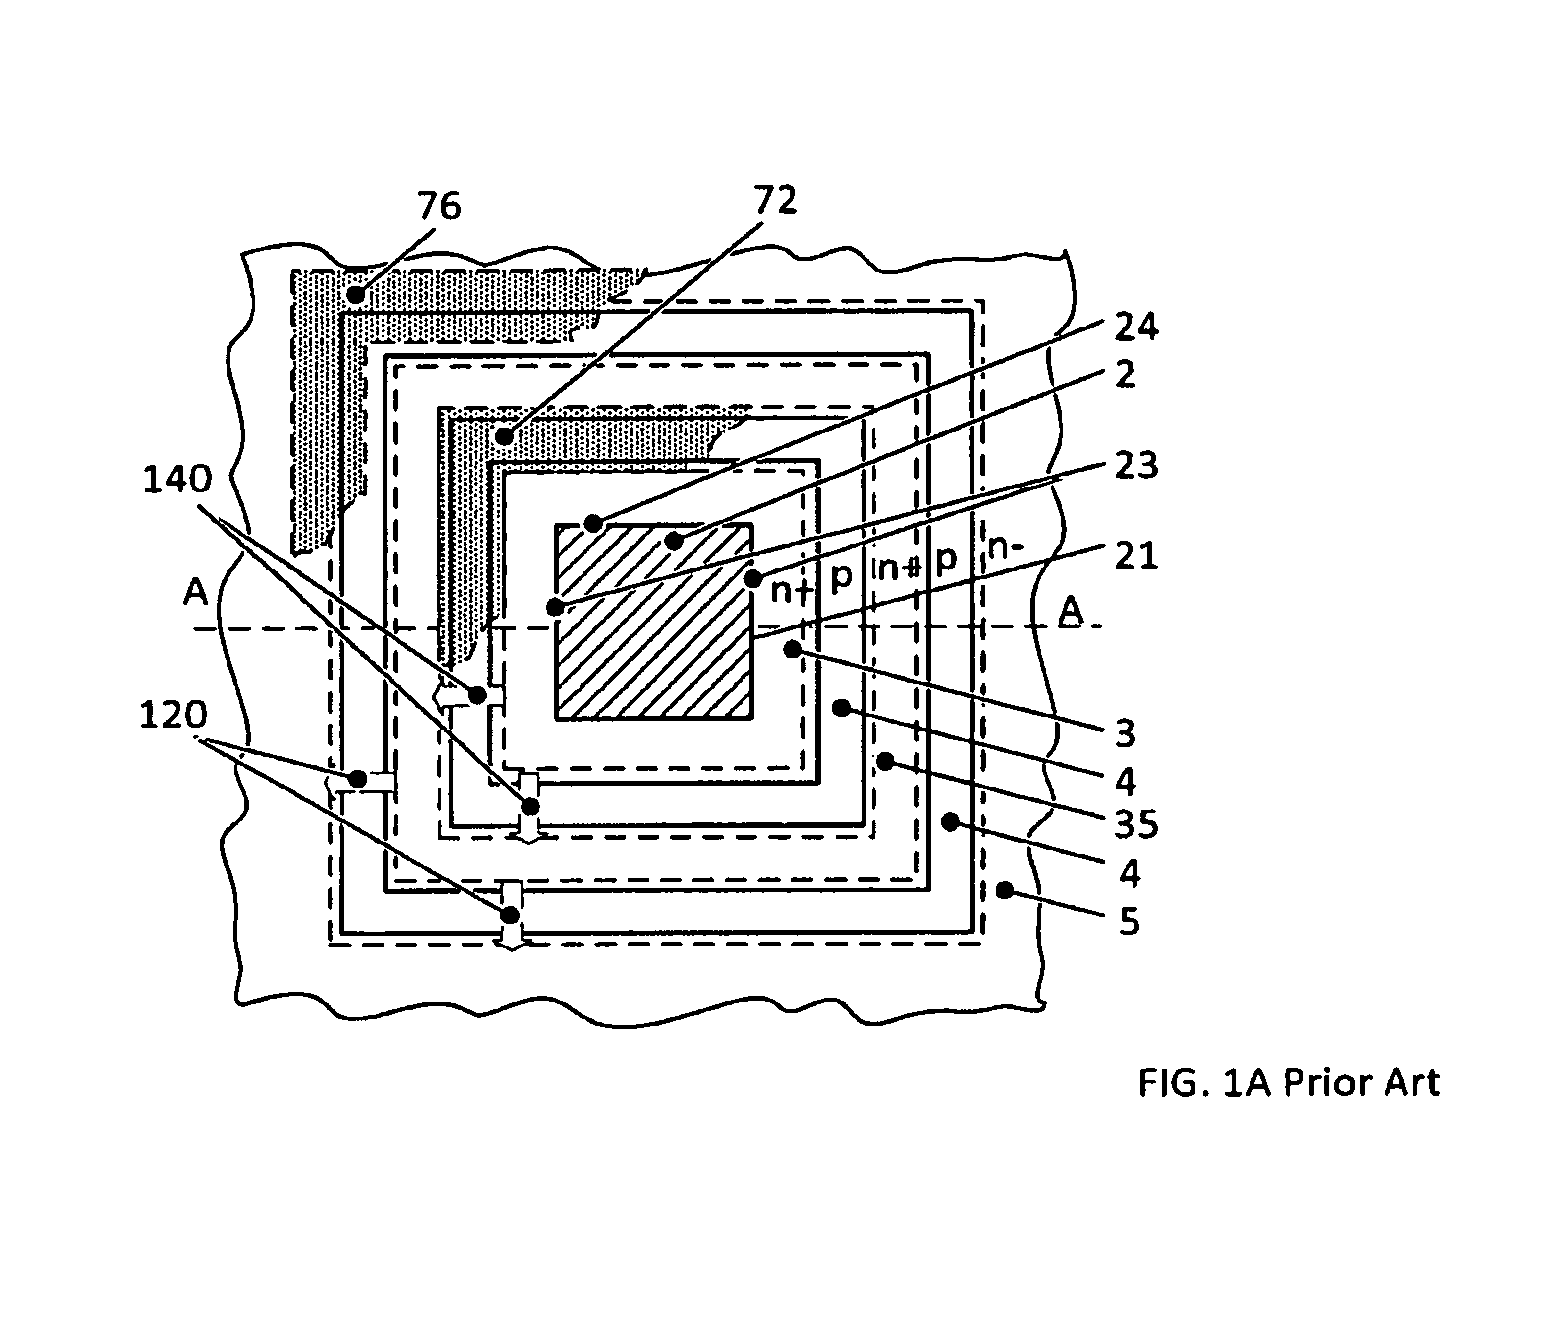 Power semiconductor device and corresponding module